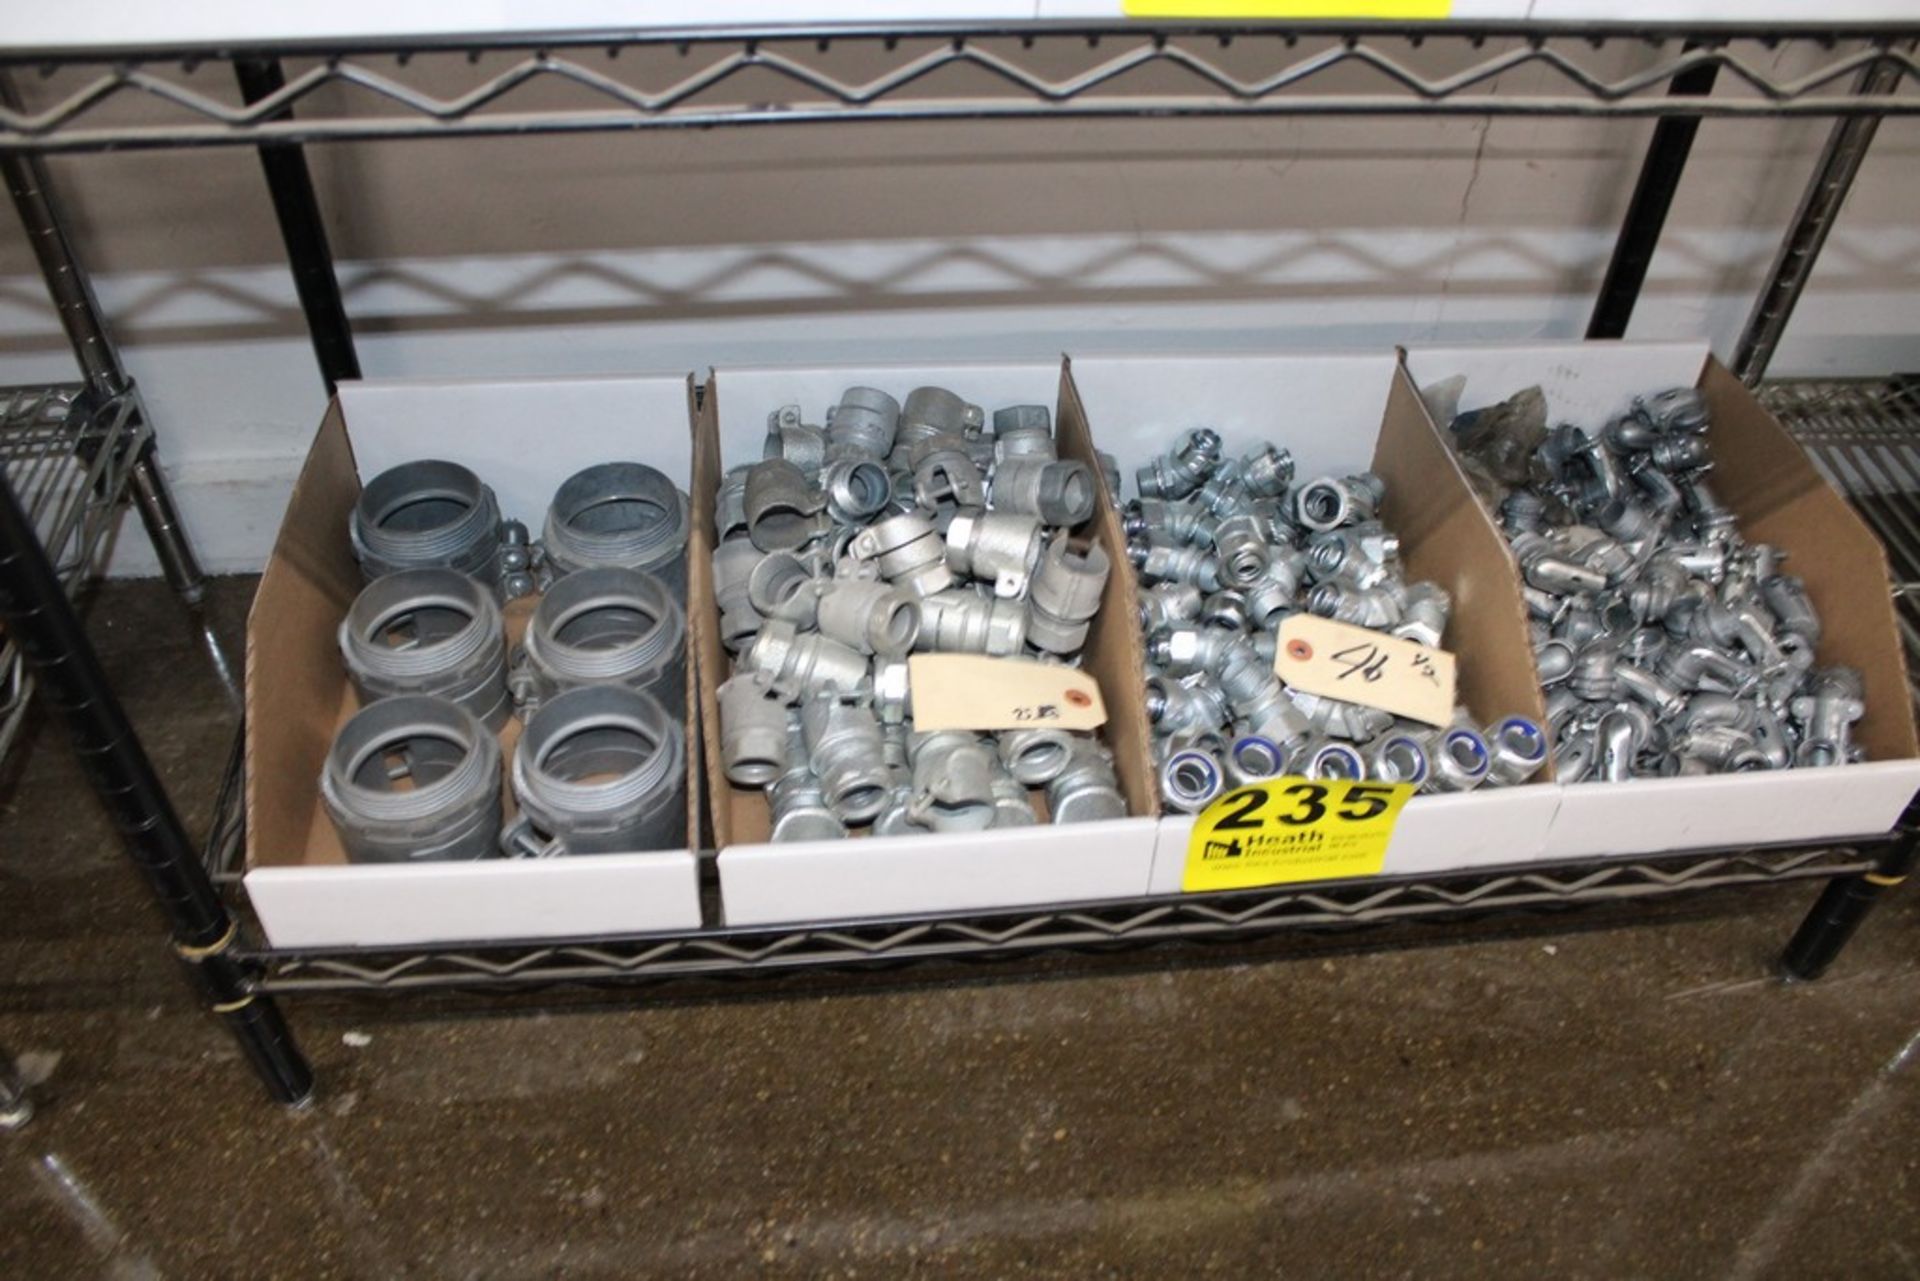 ASSORTED CONDUIT FITTINGS AND ELBOWS ON SHELF